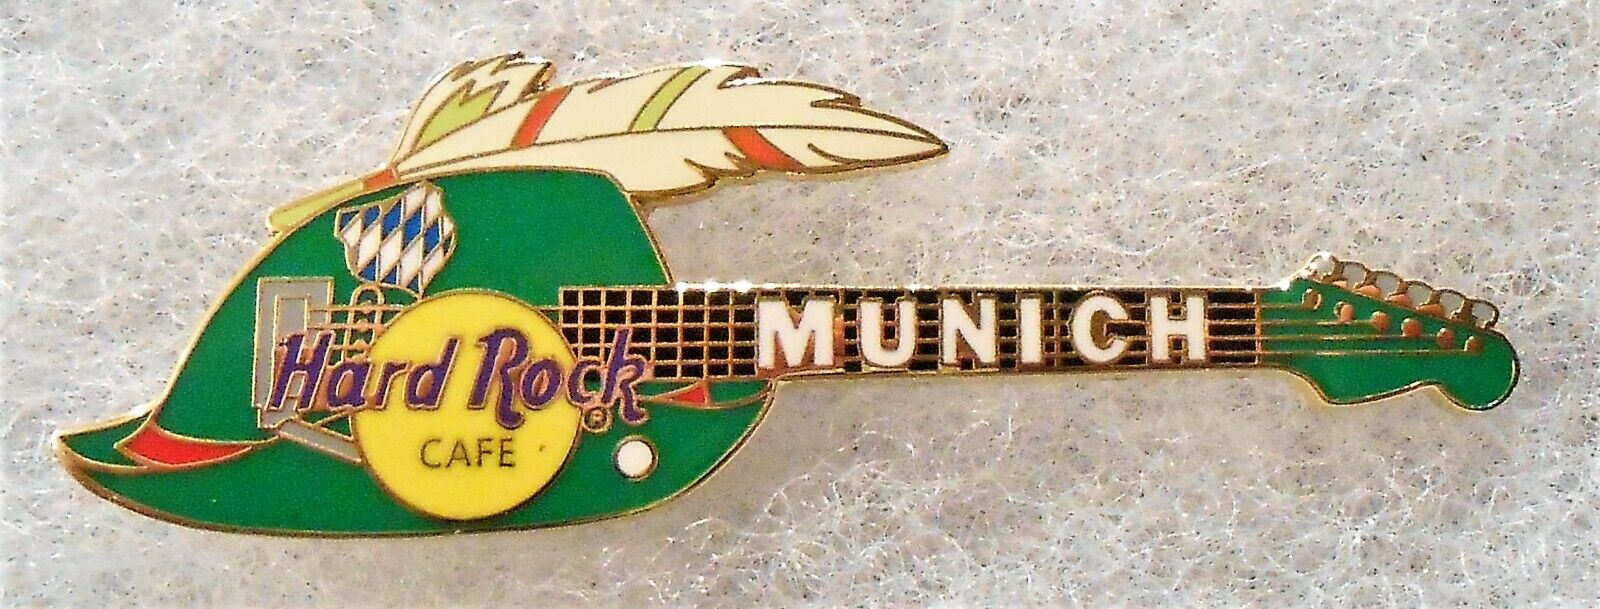 Hard Rock Cafe Munich Green Bavarian Hat With Feather Guitar Pin # 11270